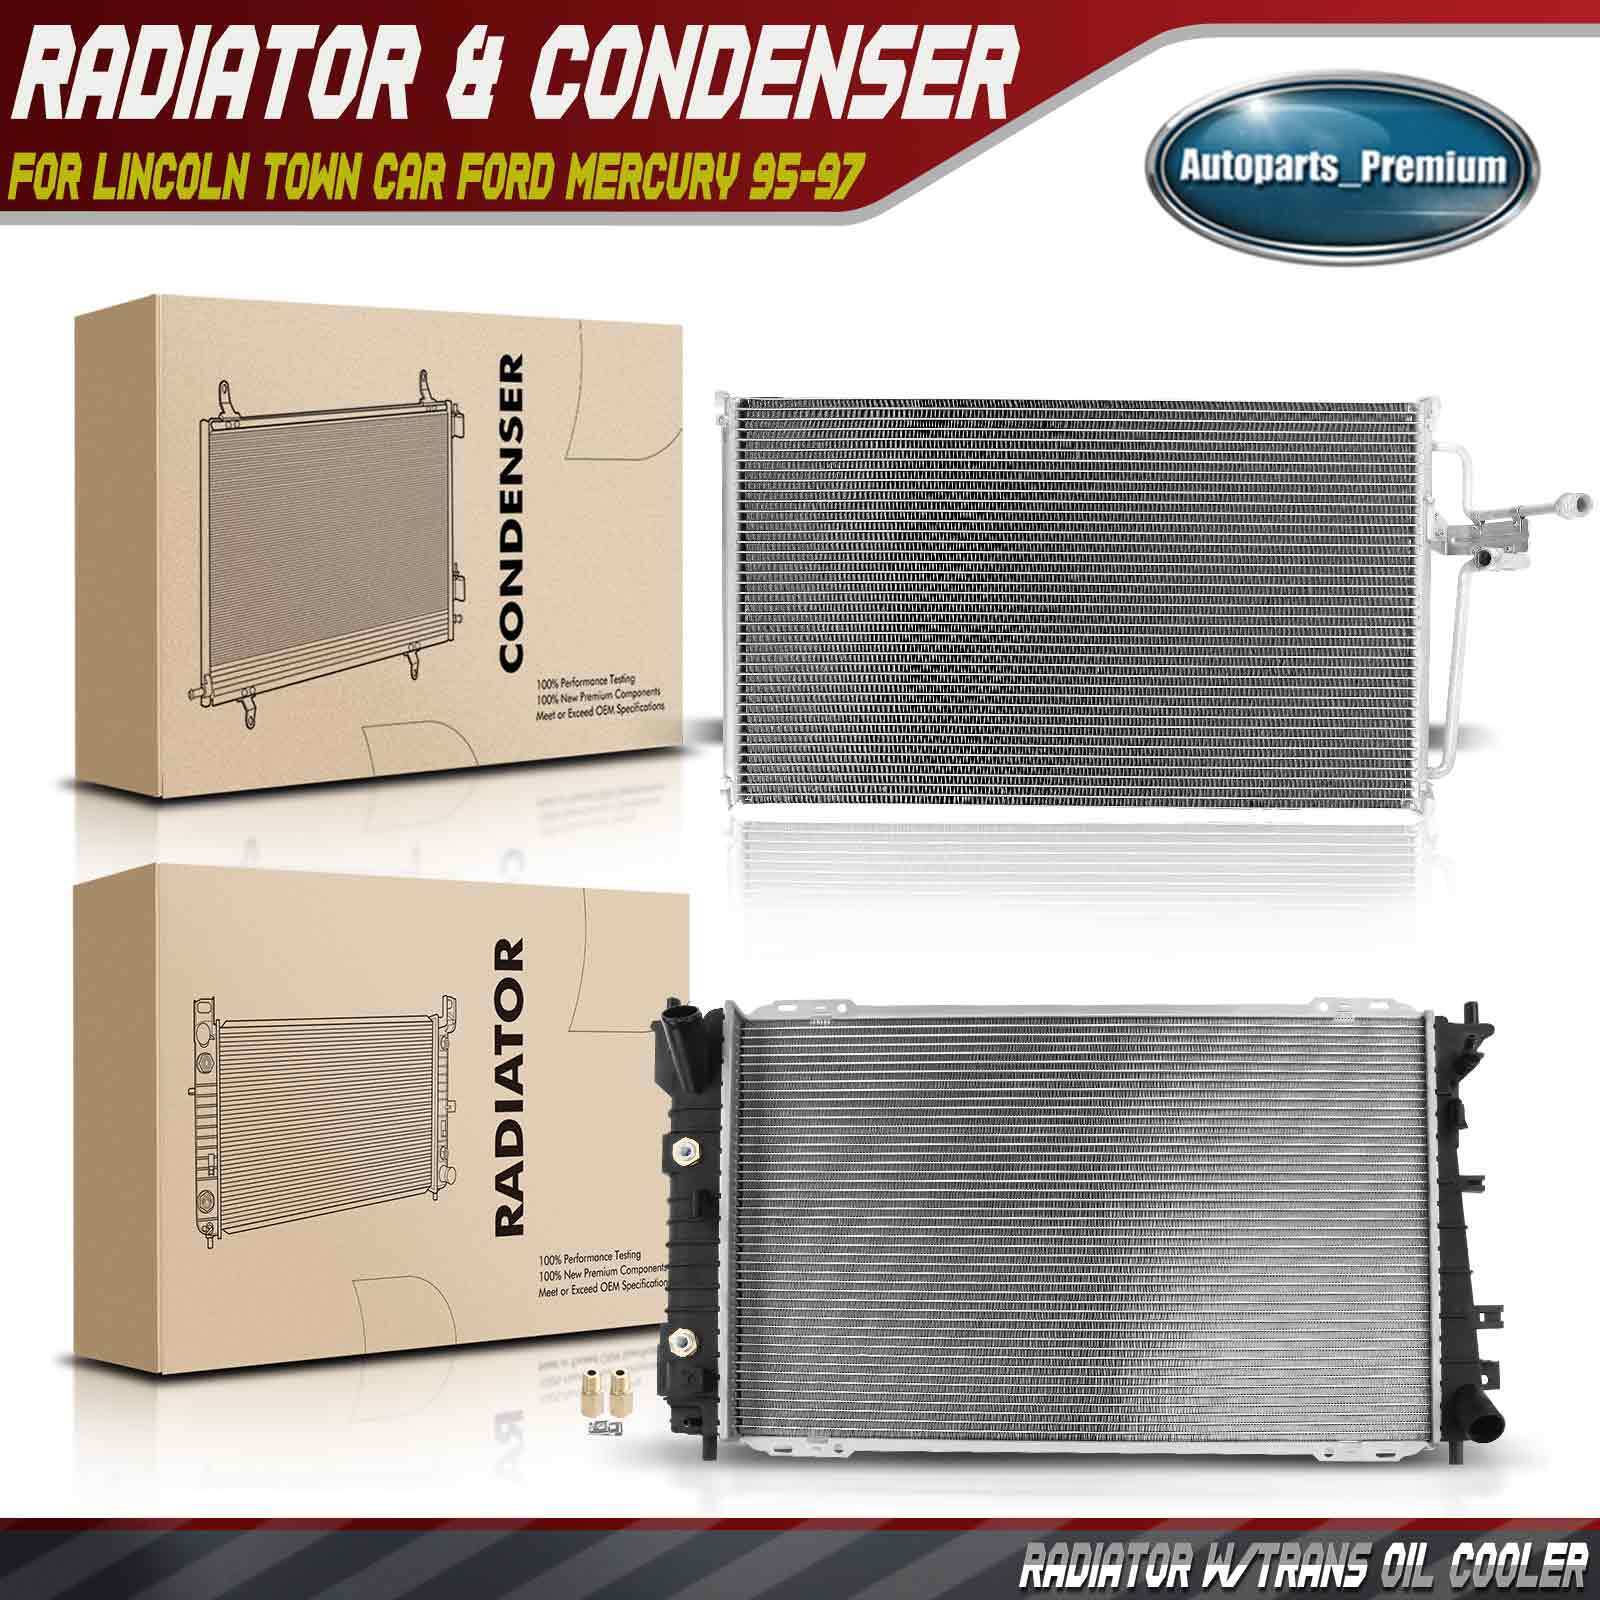 Radiator & A/C Condenser for Ford Crown Victoria Lincoln Town Car Mercury 95-97